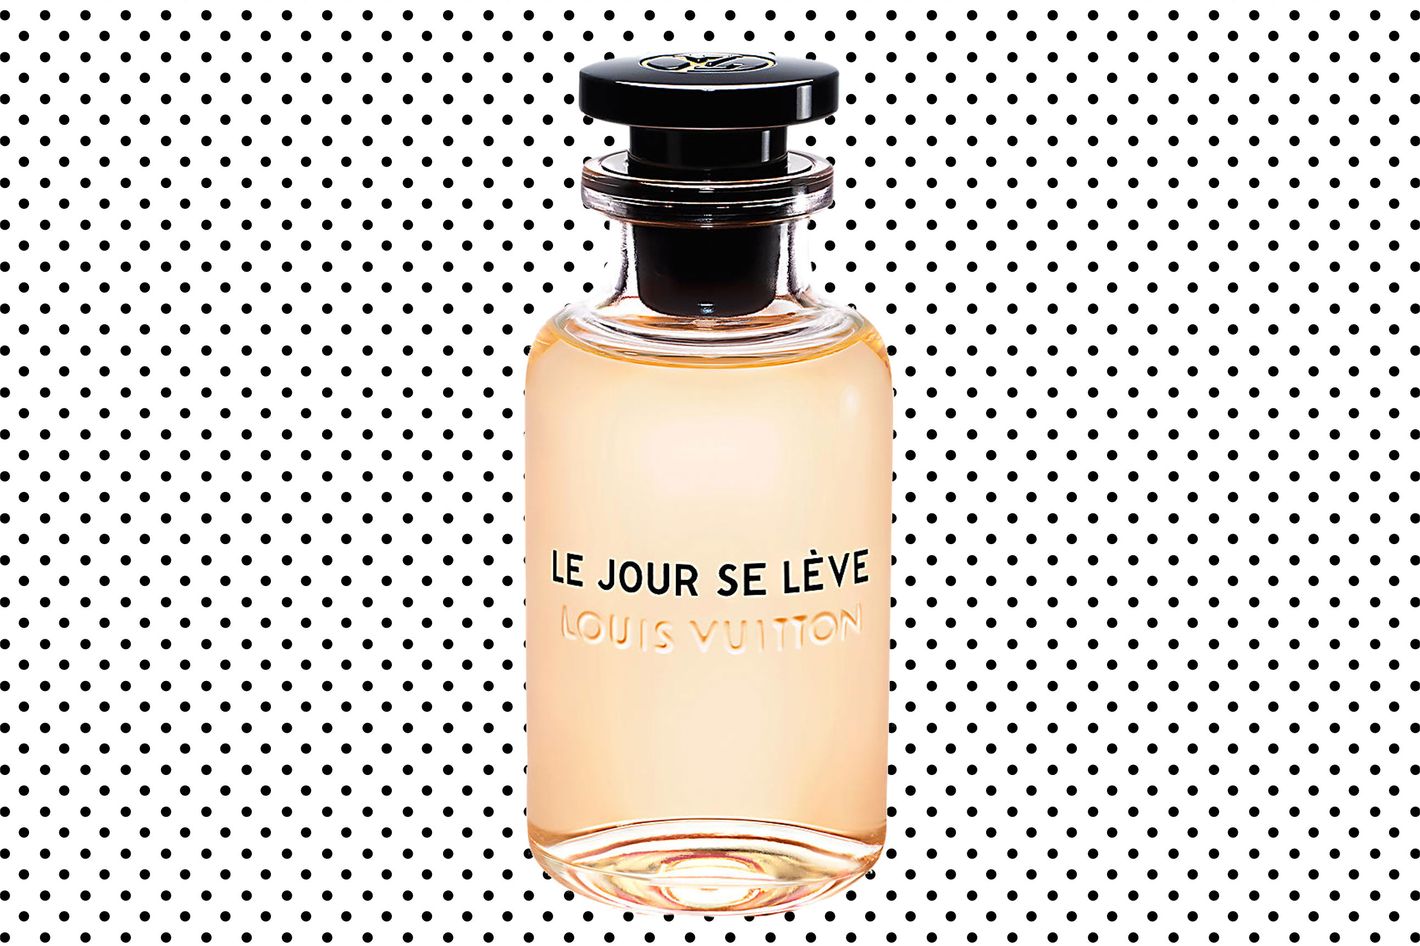 Louis Vuitton's Latest Must-Smell Scent is An Ode to the Spirit of